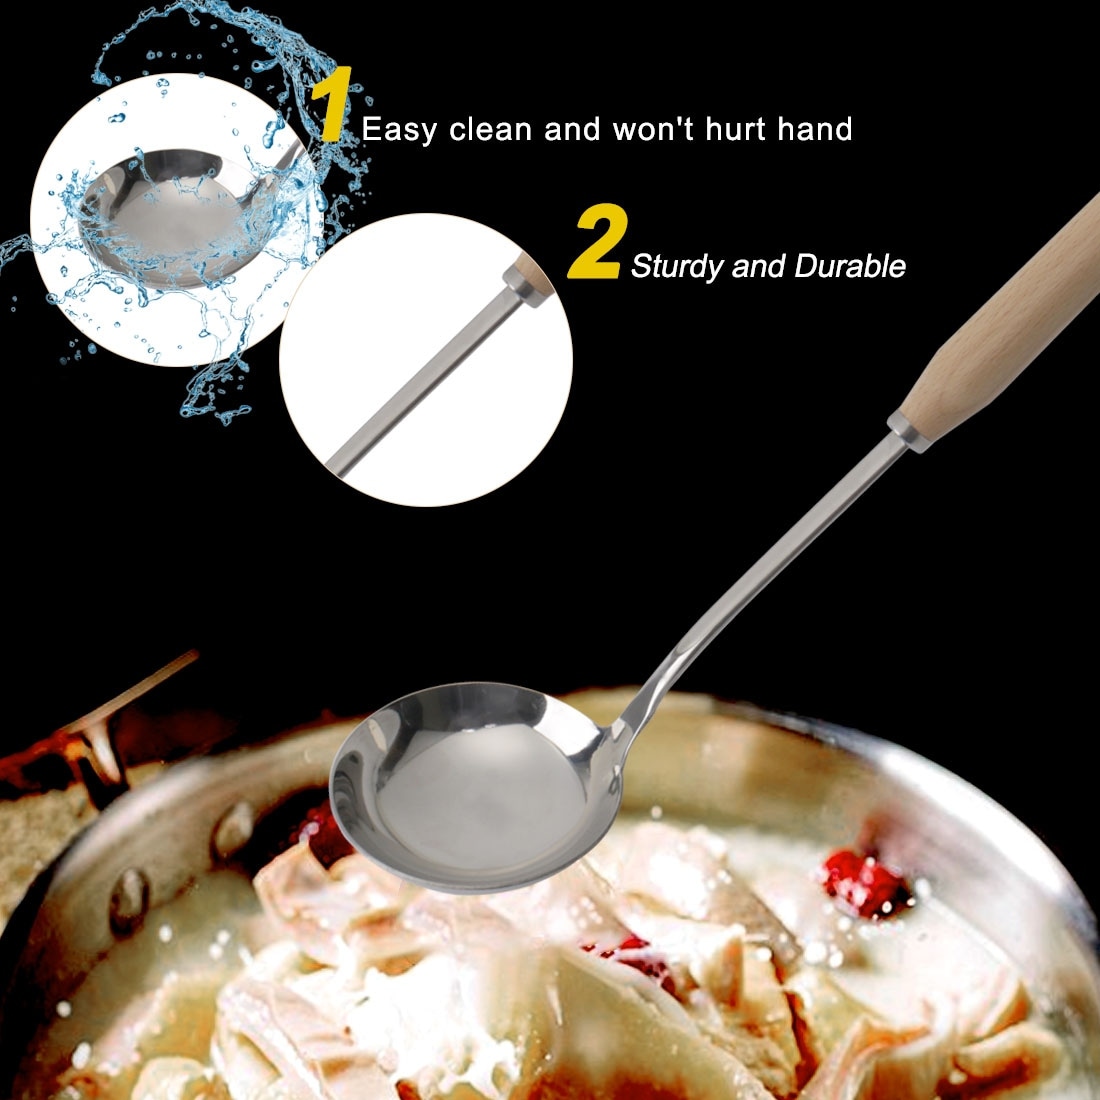 https://ak1.ostkcdn.com/images/products/is/images/direct/16a6424b59cb58601b34e397e69b64052a16db4c/Stainless-Steel-Soup-Ladle-Spoon-Wooden-Handle-Cookware-Utensil.jpg